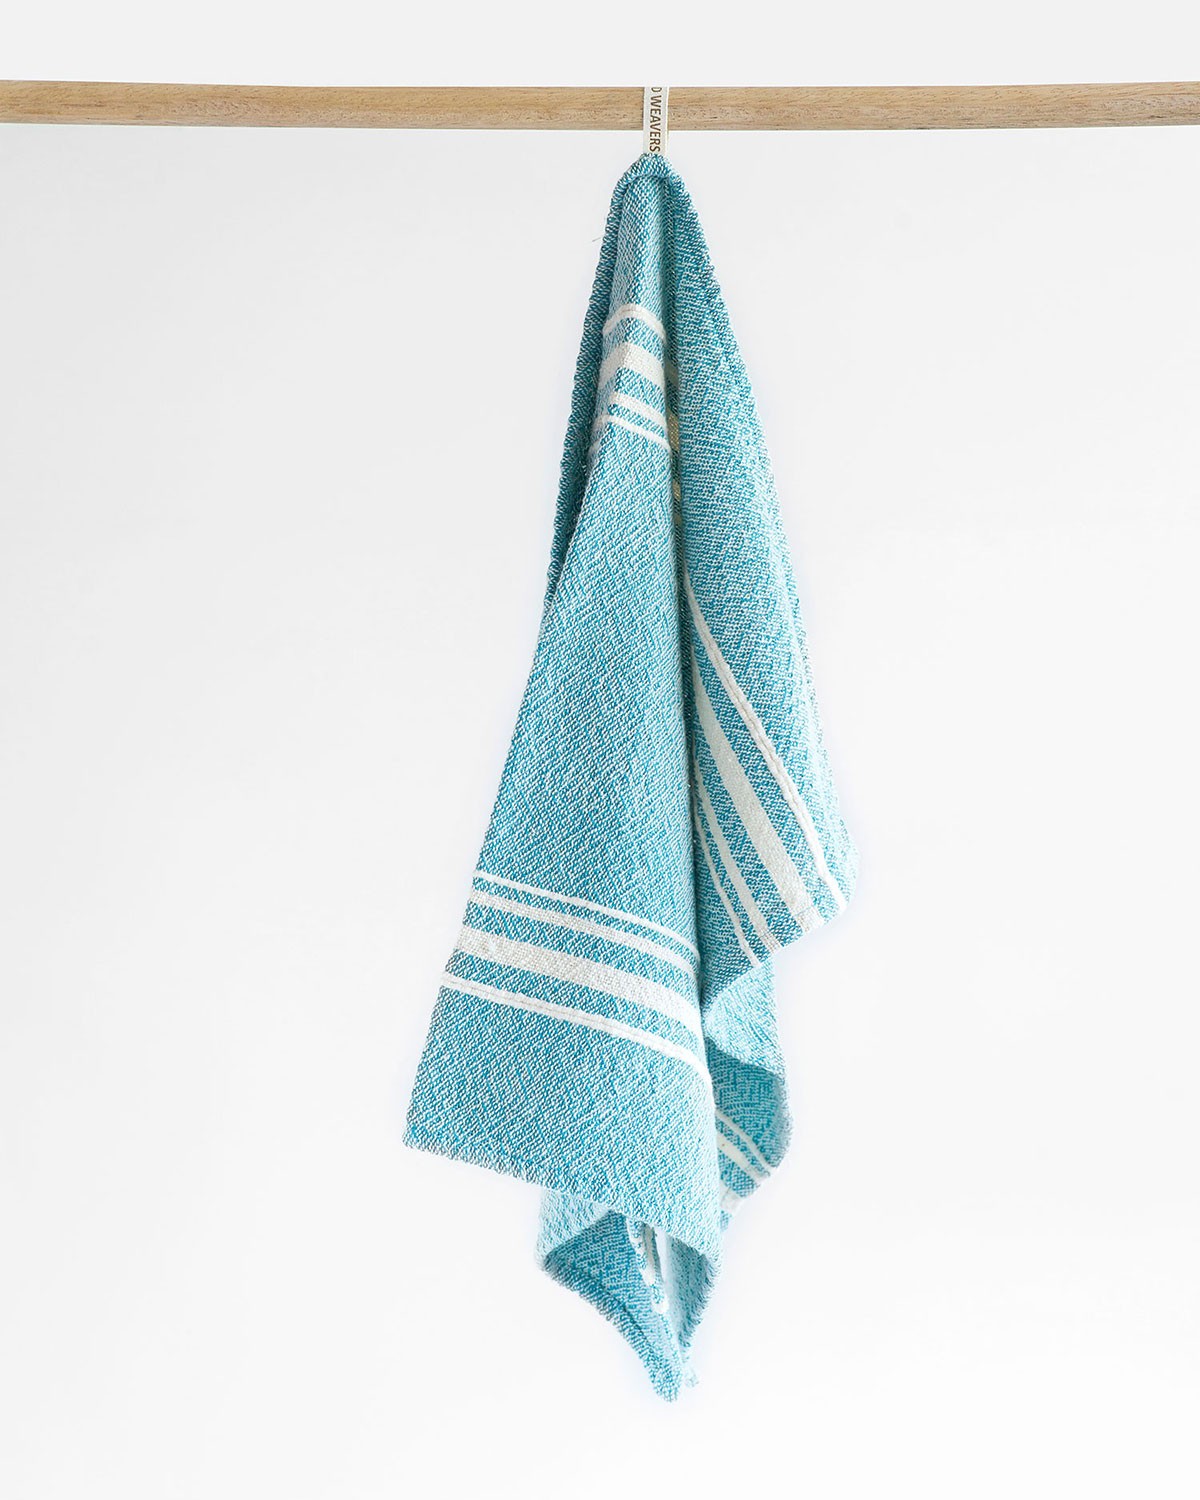 Towels_KitchenTowel_TeaTowel_Handwoven_Contemporary_Turquoise